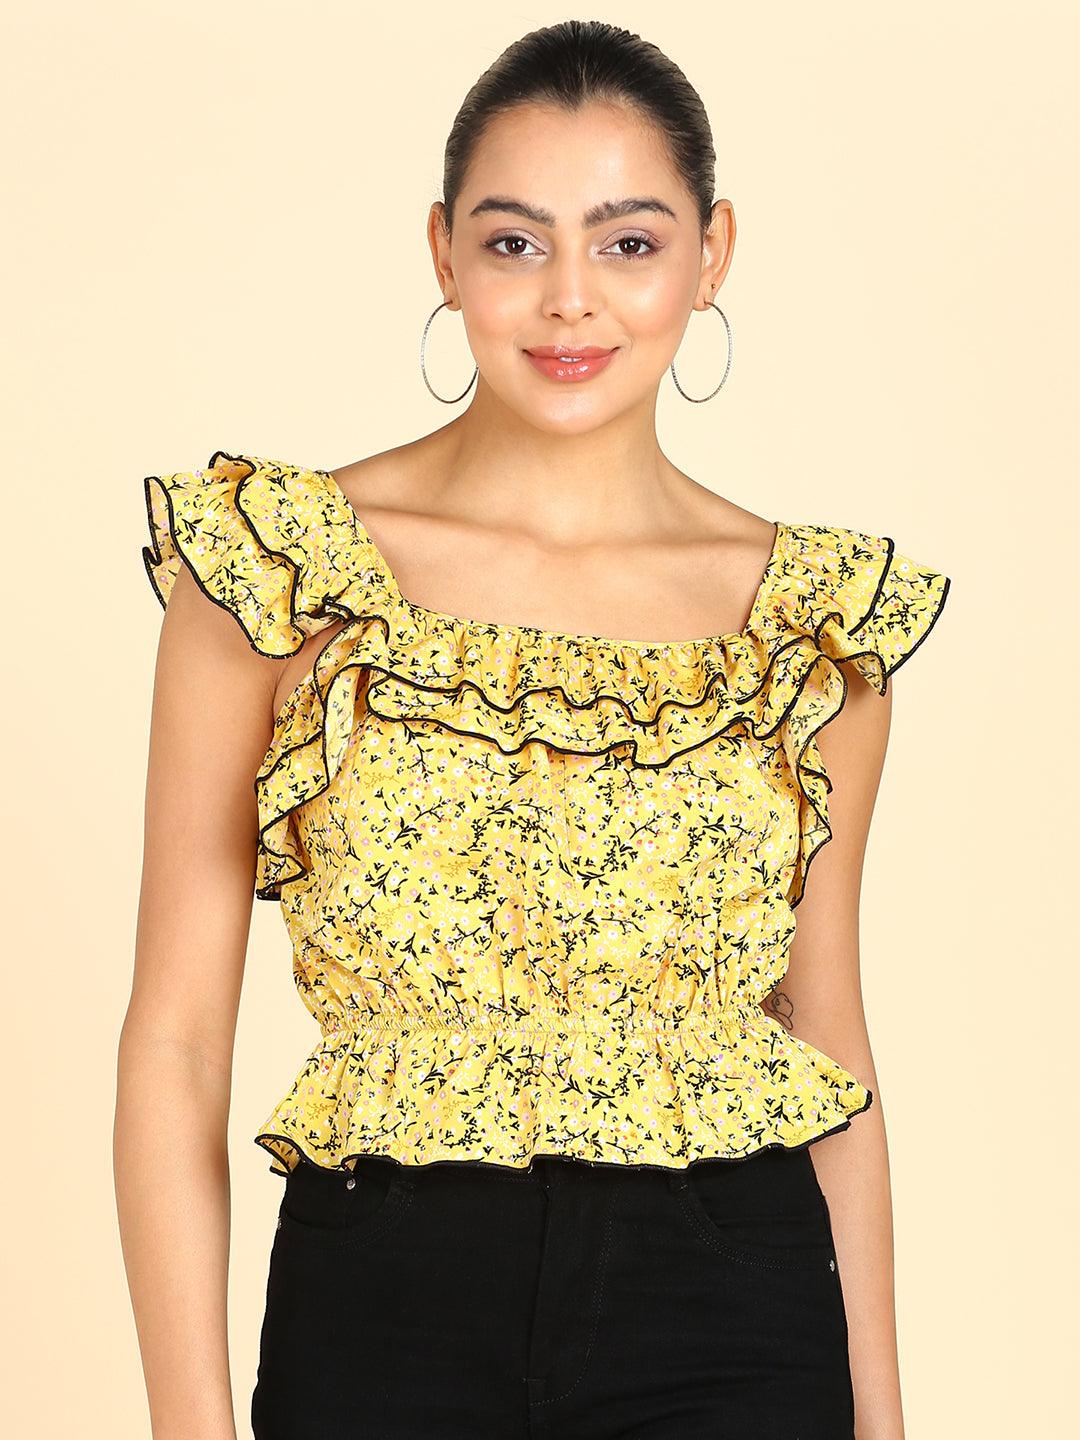 Floral Printed Yellow Empire Top - Znxclothing